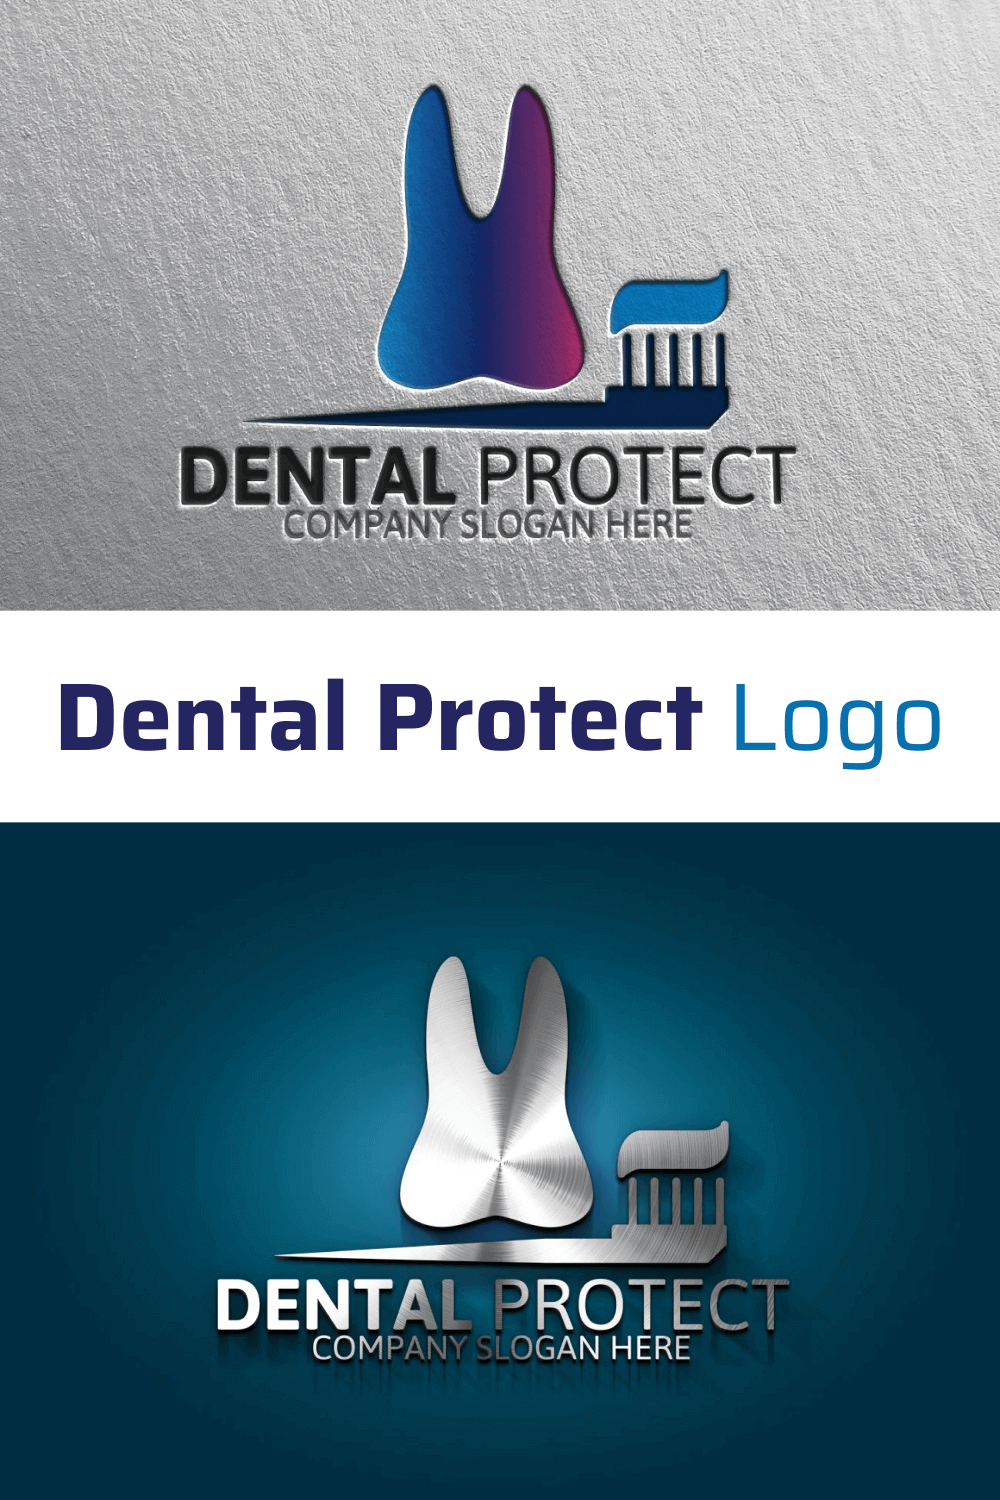 Silver Things of Dental Protect Company.